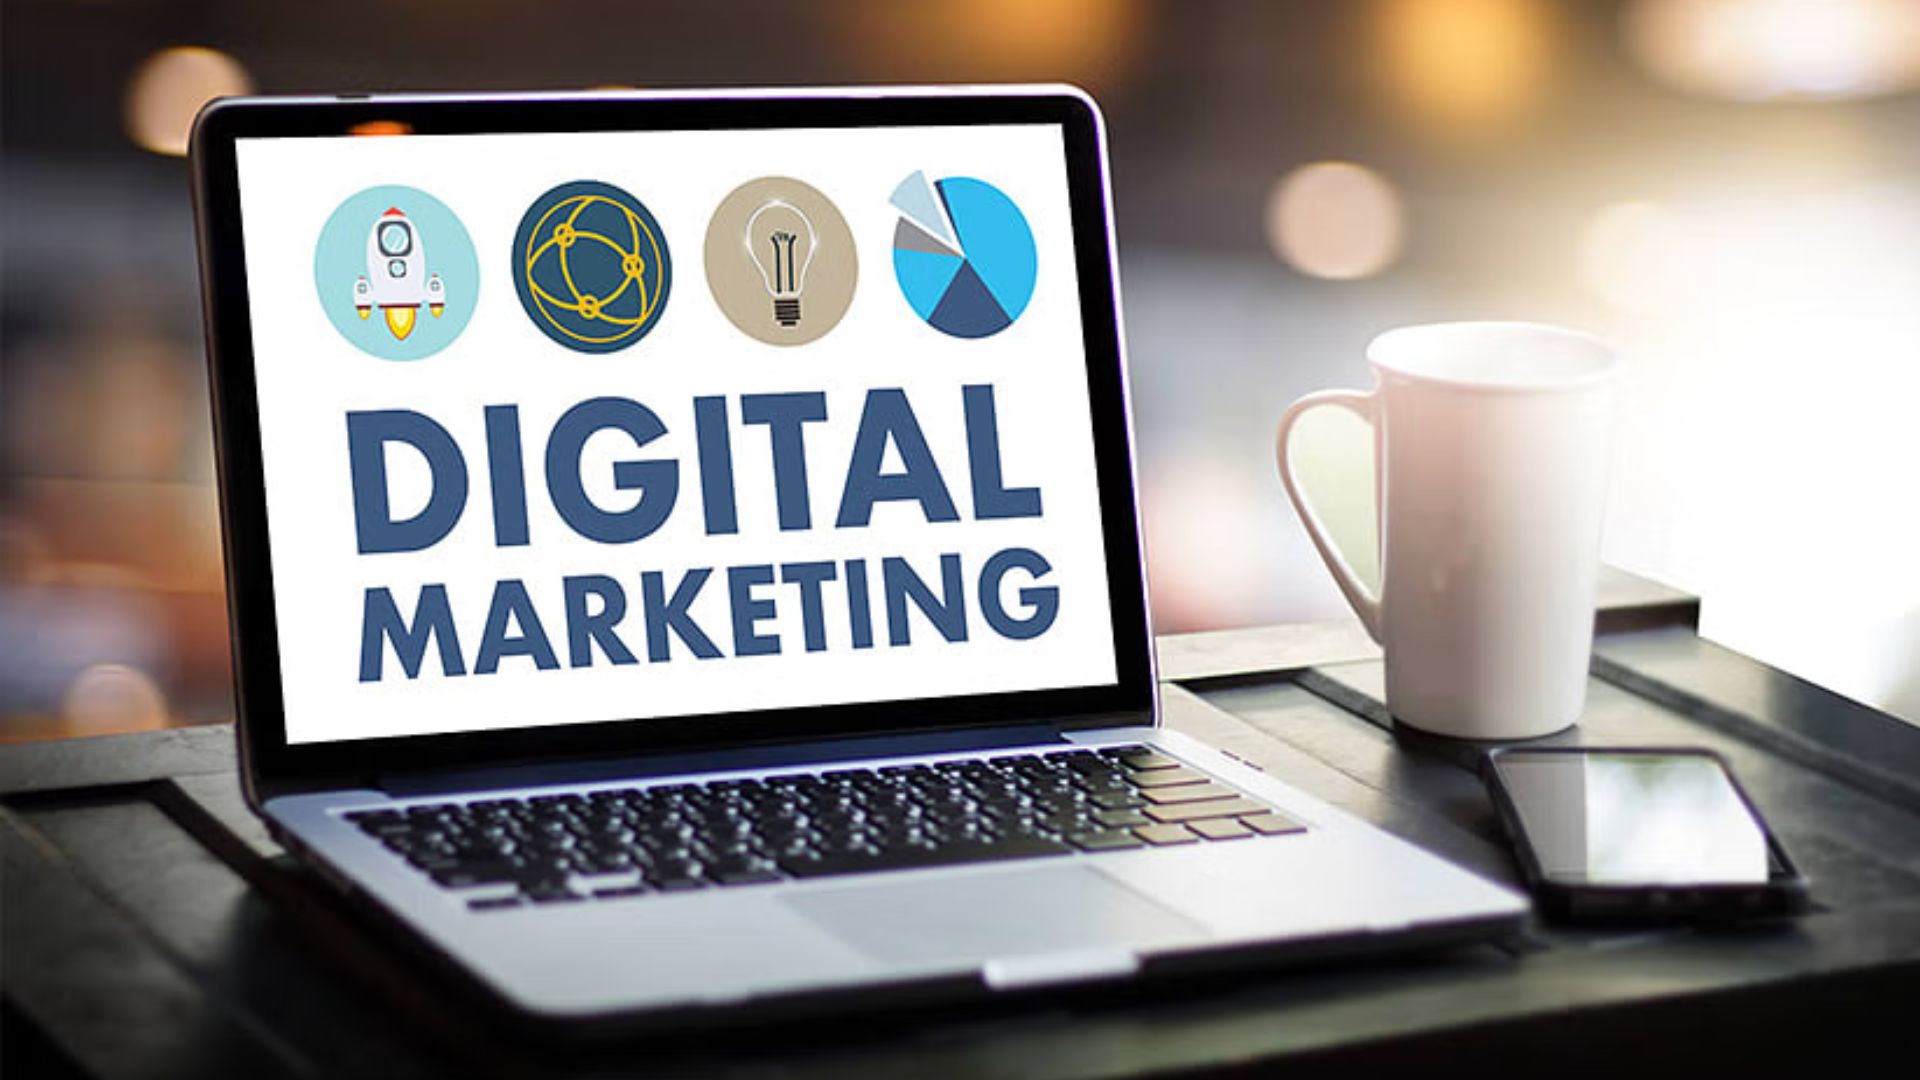 How Important Is Digital Marketing For Financial Companies?